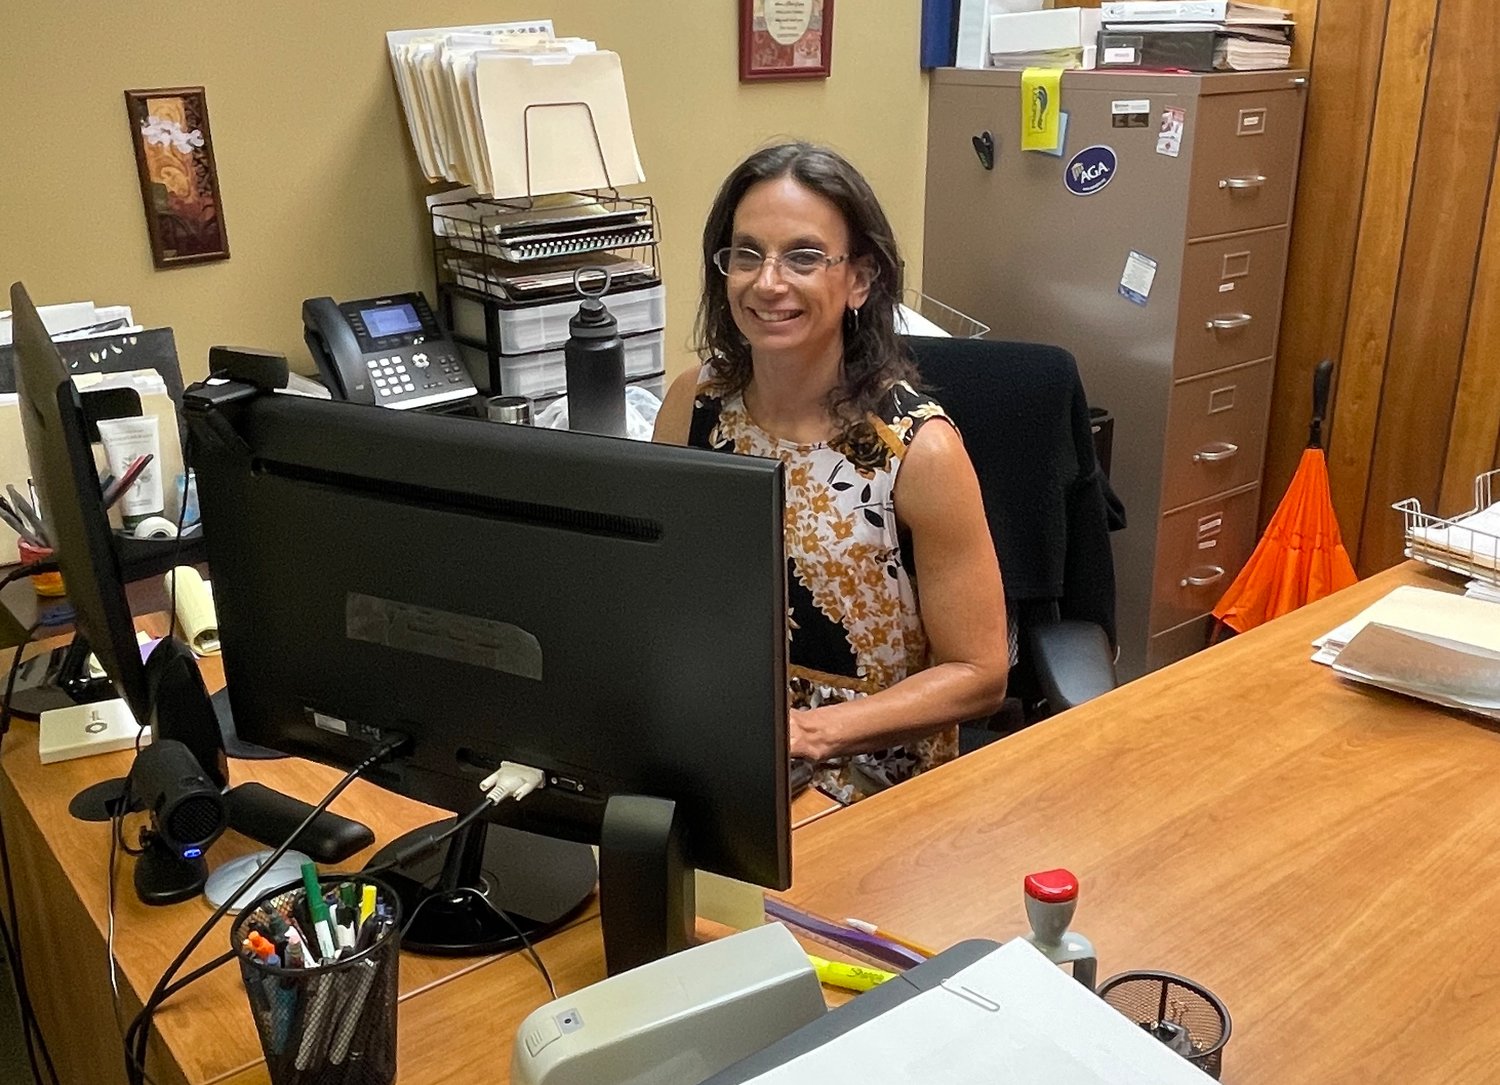 Monica Robinson smiles from behind her desk. Monica’s responsibilities as the Finance Director include report preparation and budget creation for the City of Marshfield.